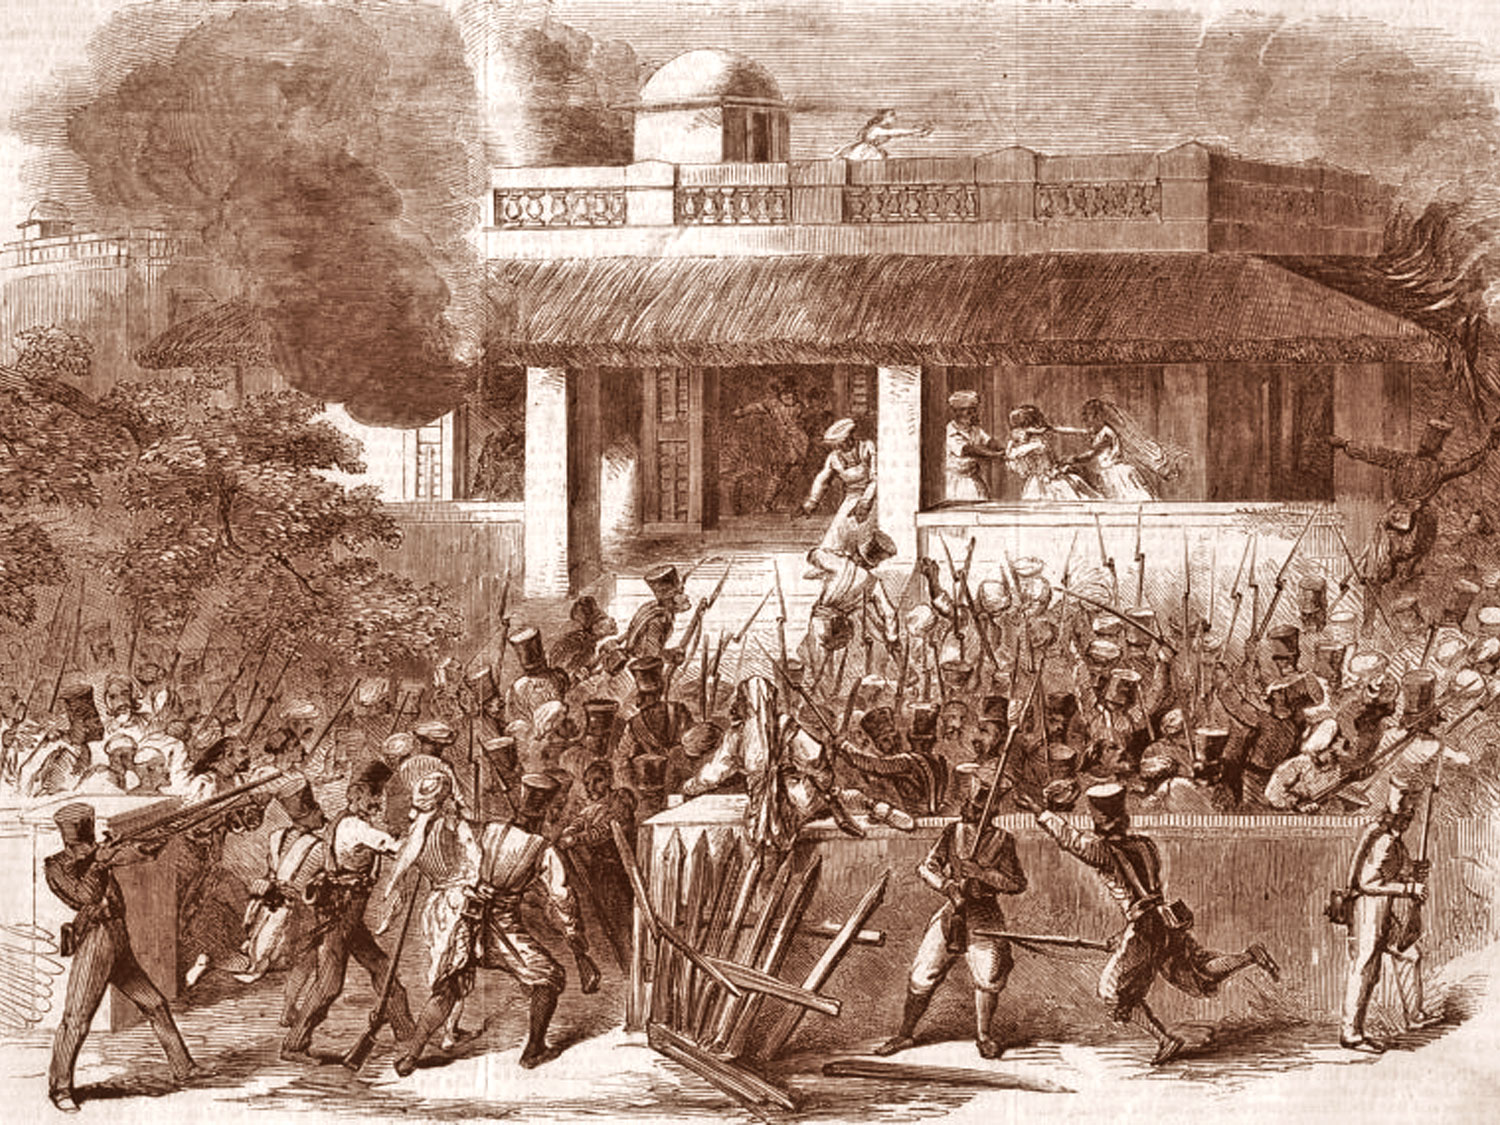 Image shows an Illustrated London times Illustration depicting a Colonial era Bungalow in flames during the Mutiny of 1857, at Meerut.